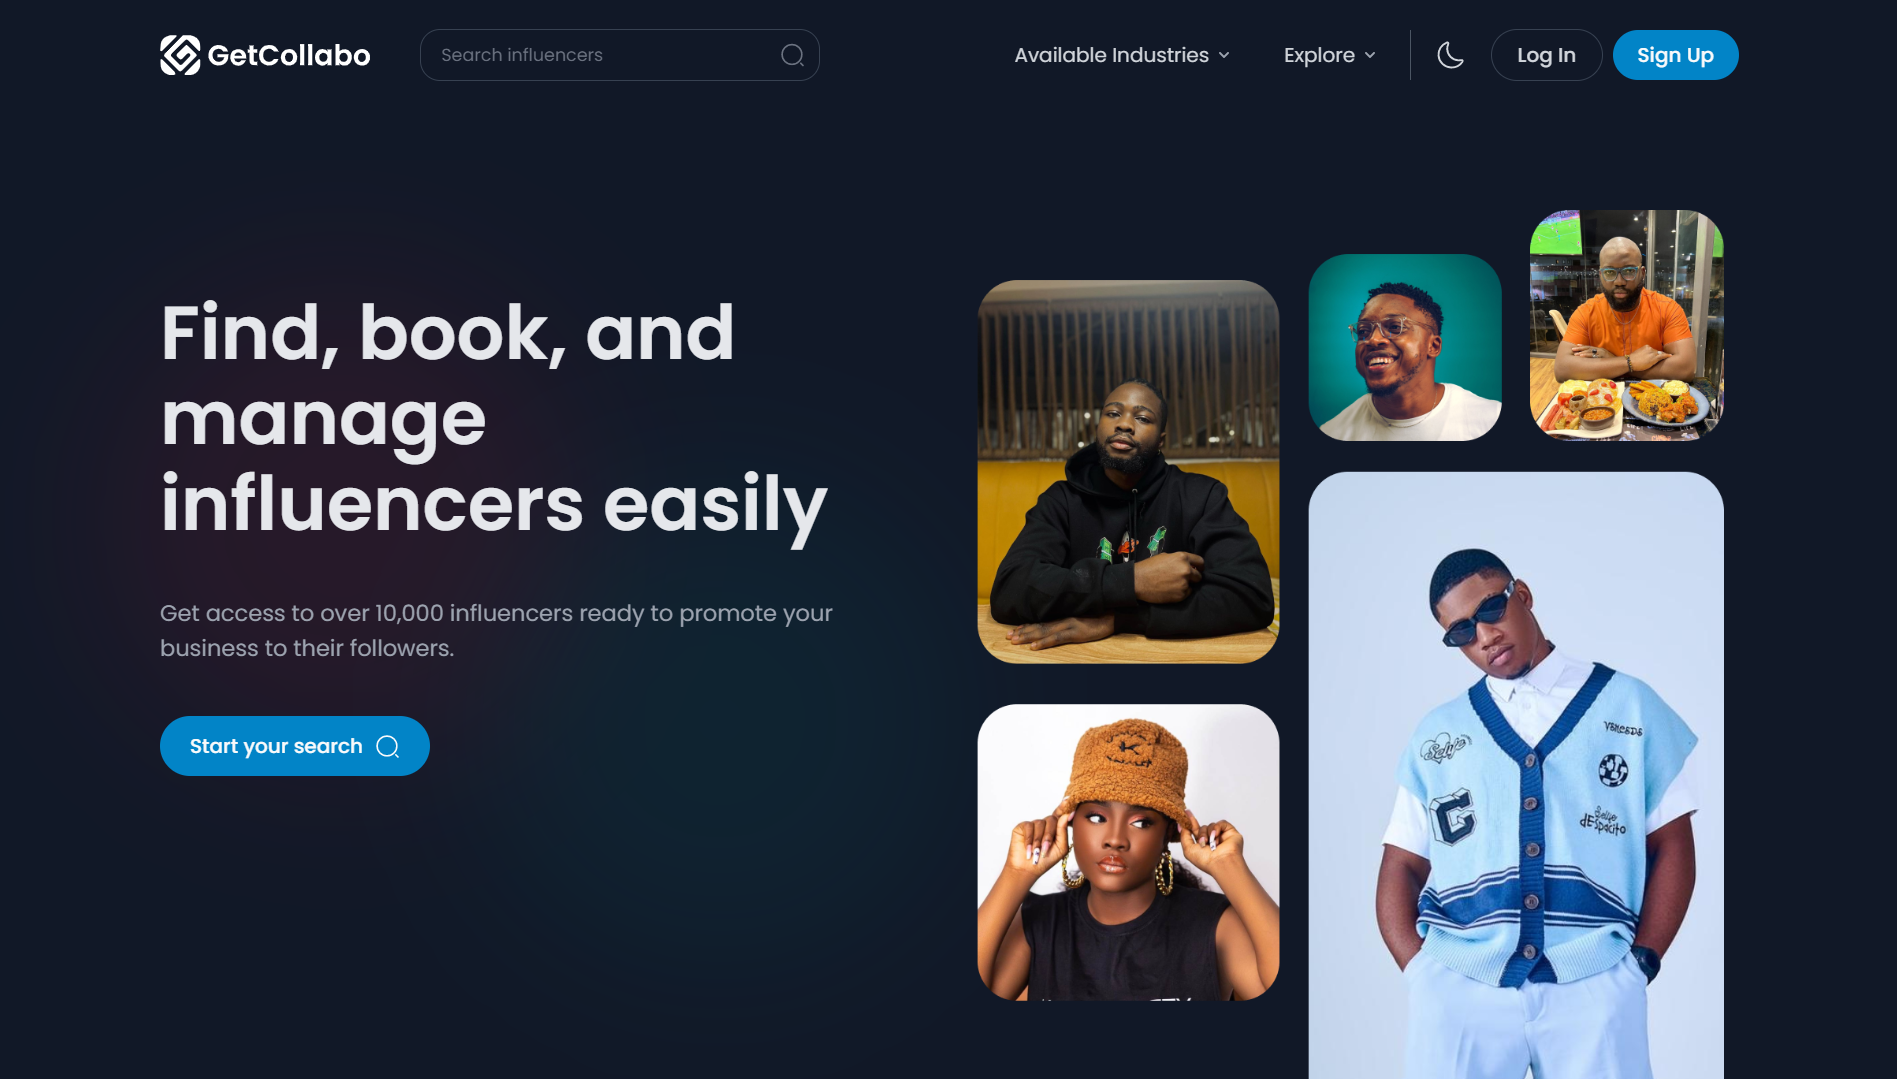 GetCollabo: The easiest way to find, book, and manage influencers